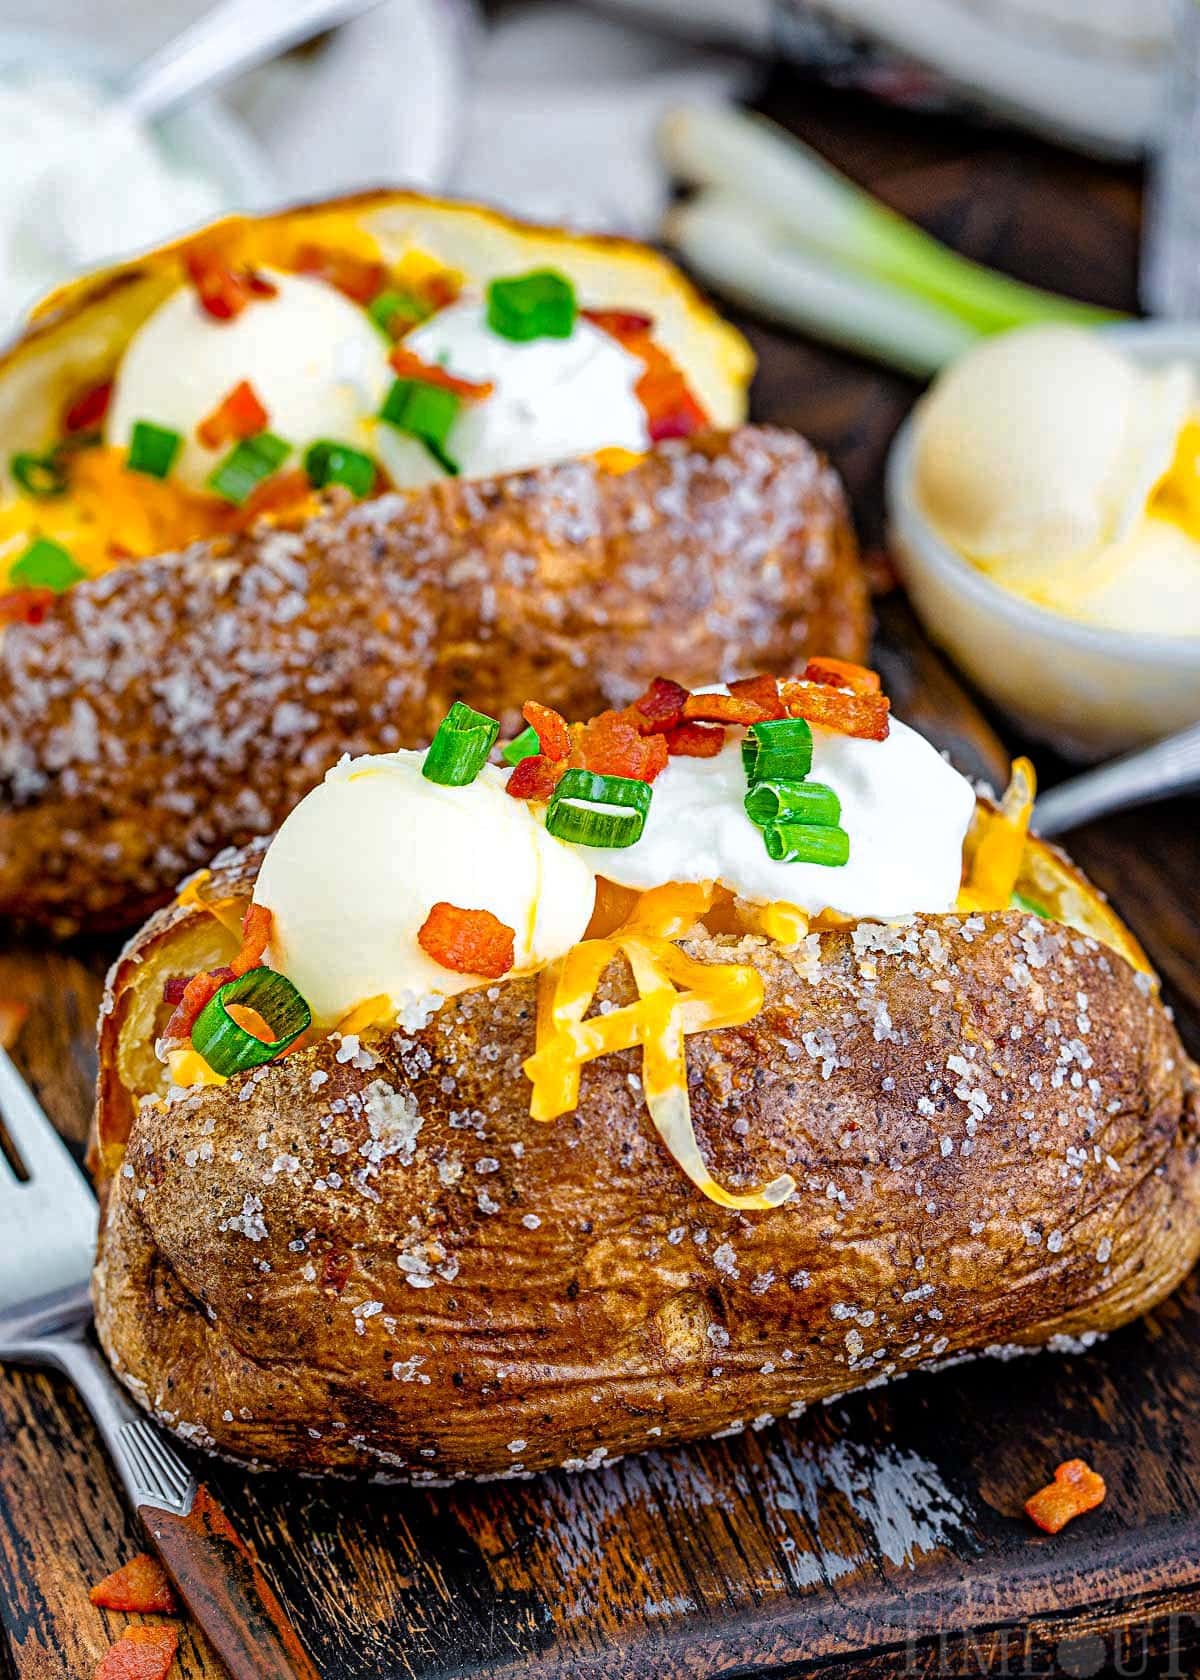 angled look down at two baked potatoes topped with cheese and sour cream and bacon ready to be enjoyed. You can see the salt on the skin of the potato.